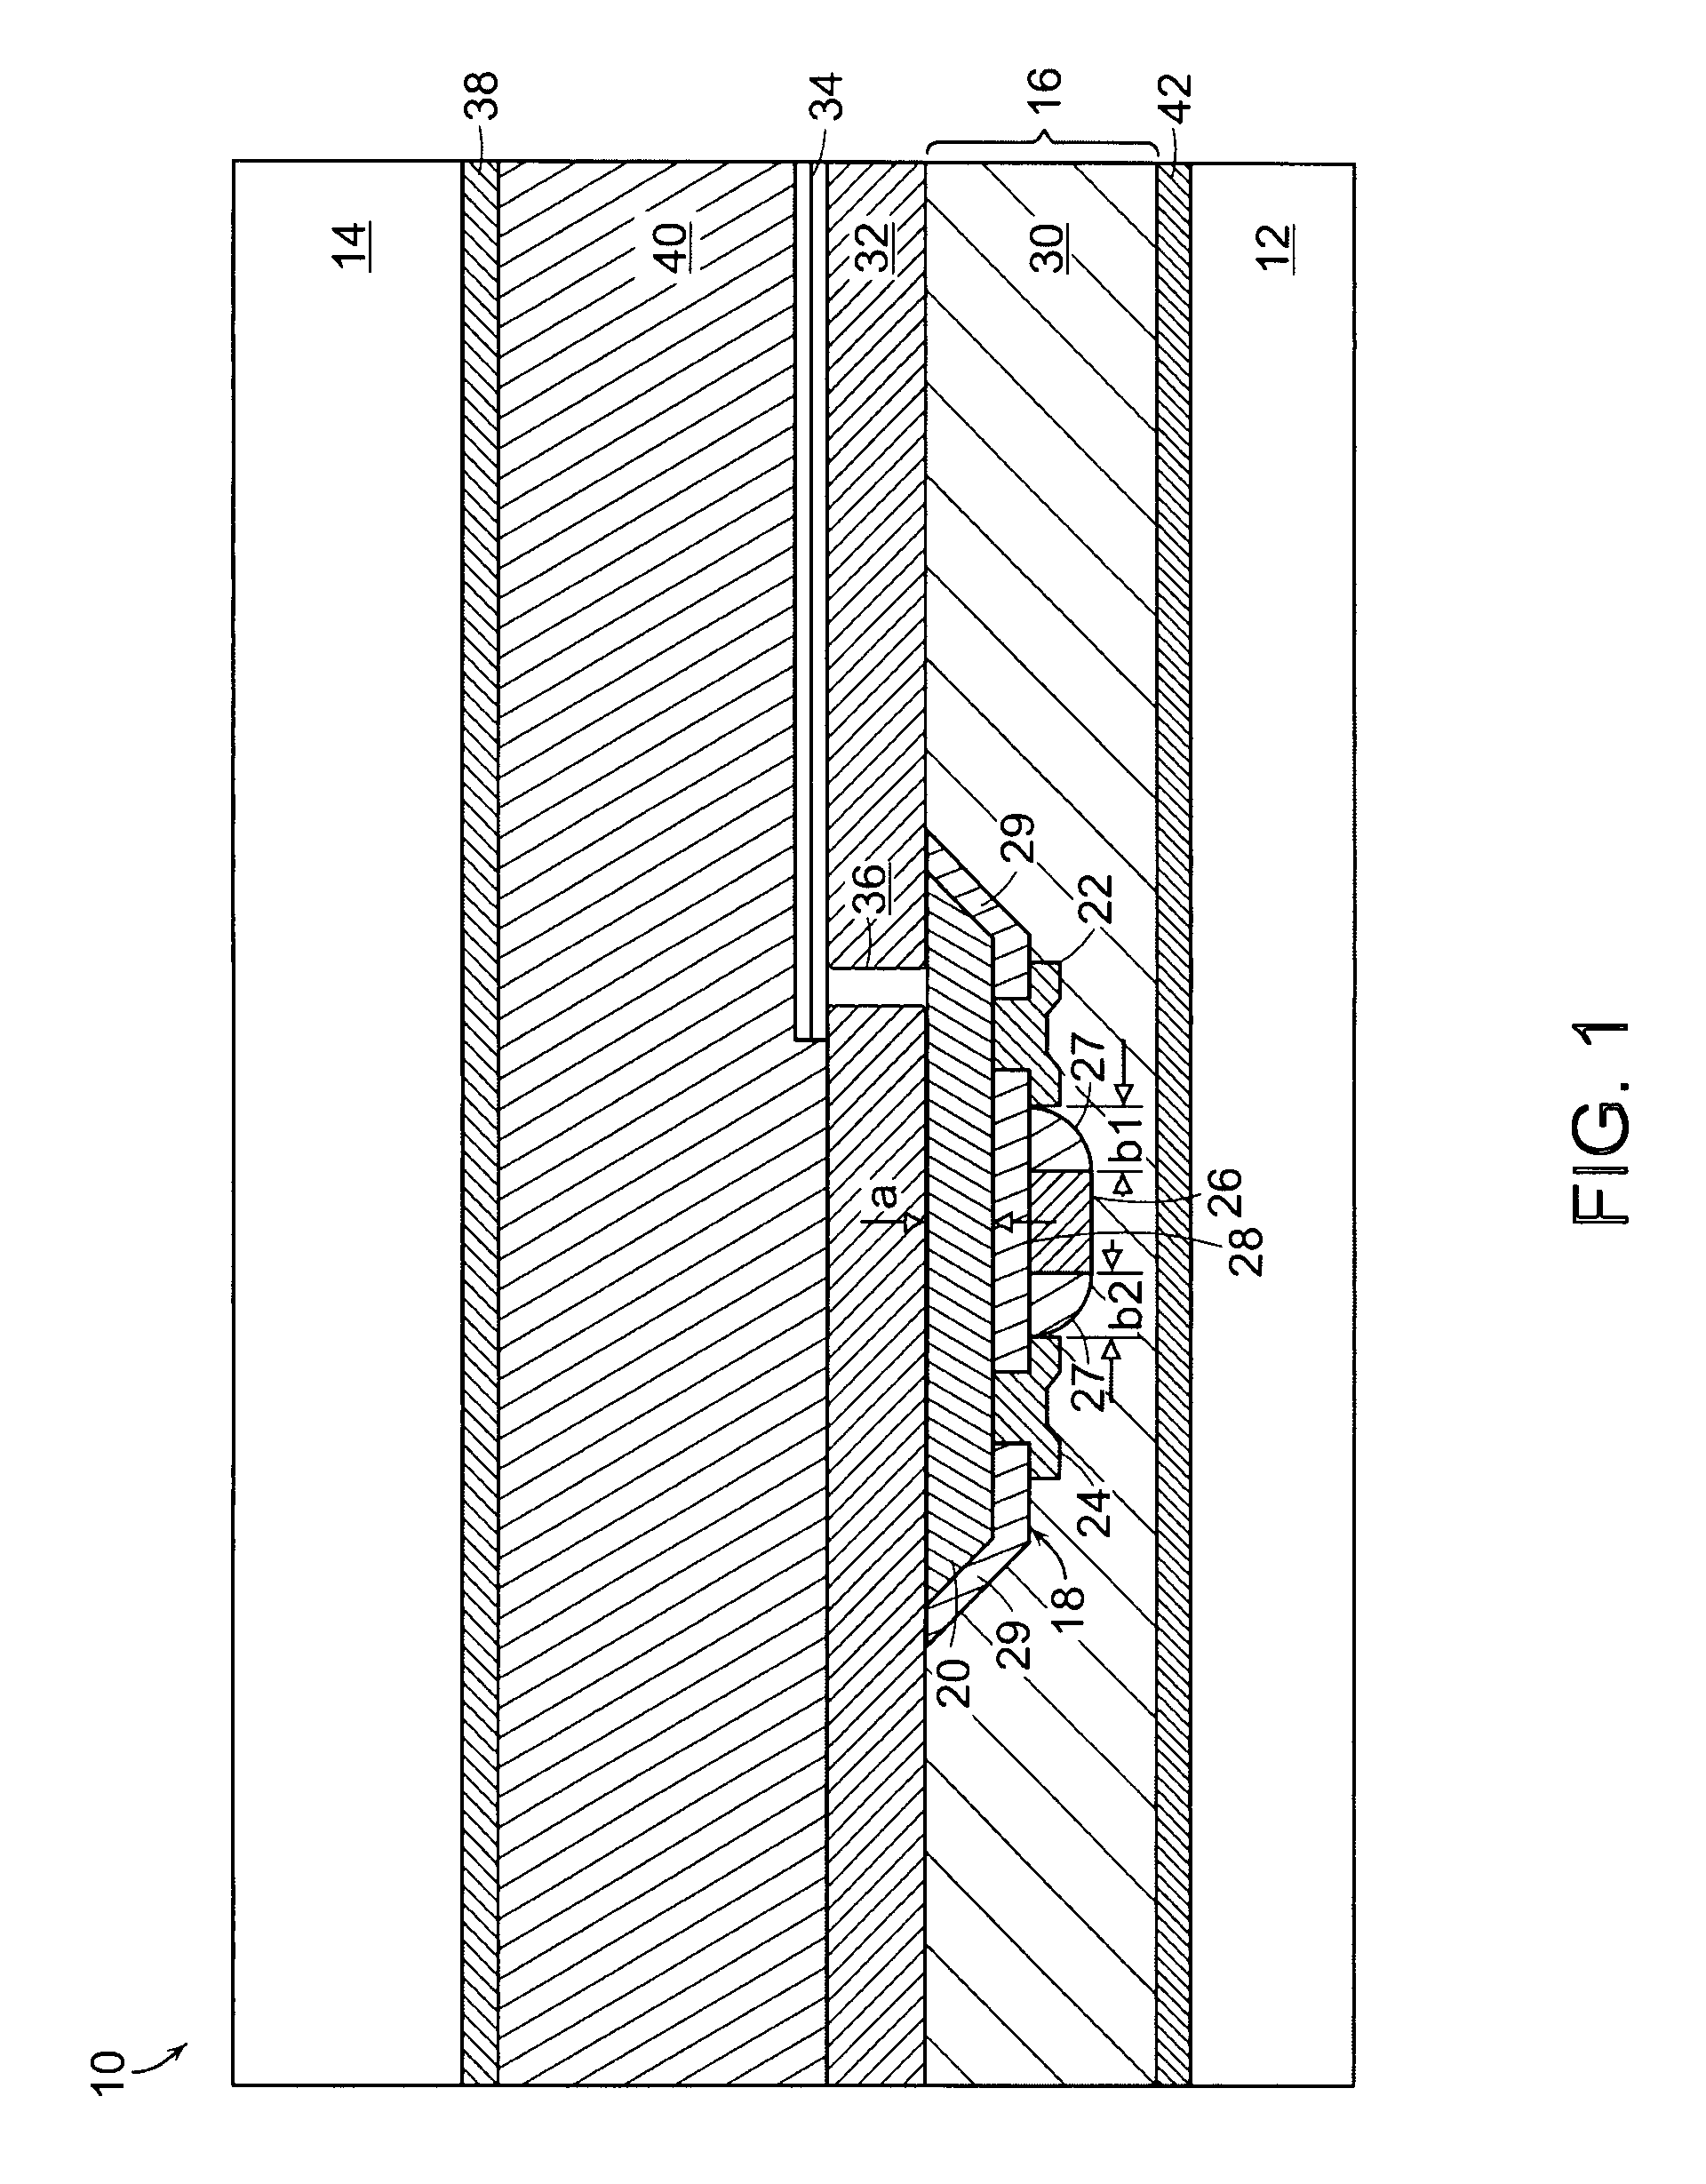 Display system with single crystal Si thin film transistors